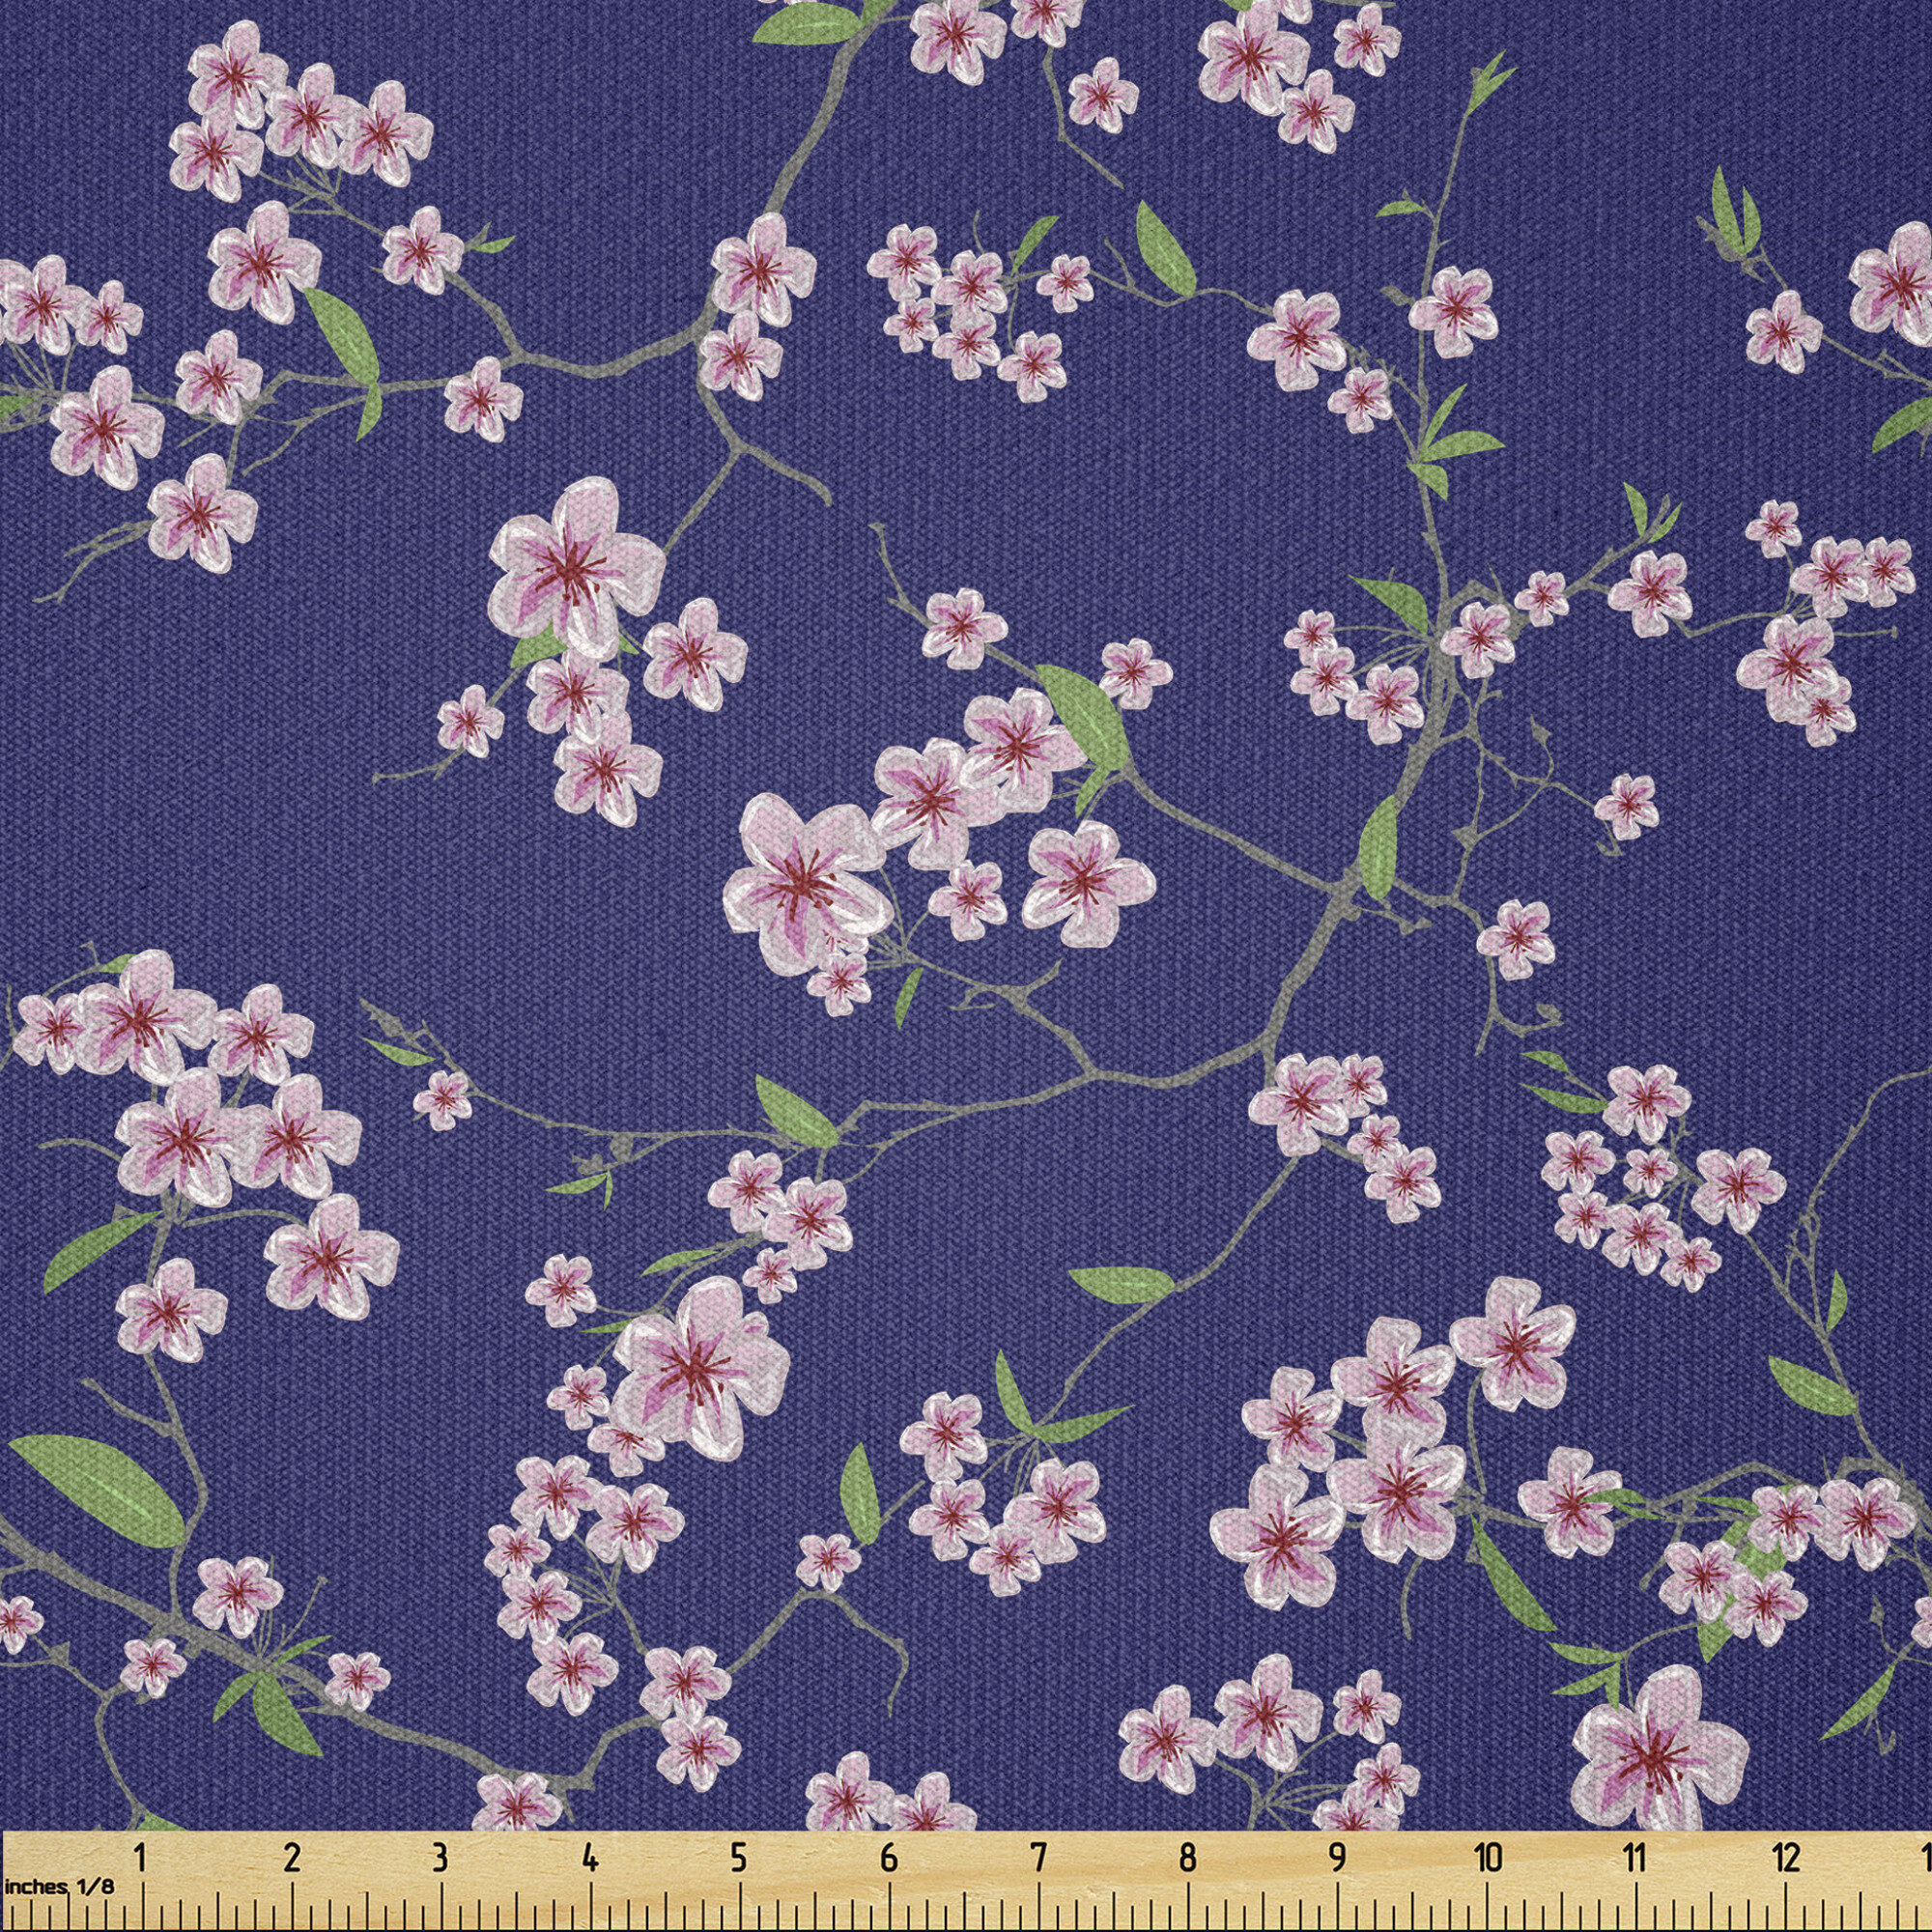 Japanese Style Cotton Fabric with Great Wave for Clothing Home Decor 1/2 Yard 